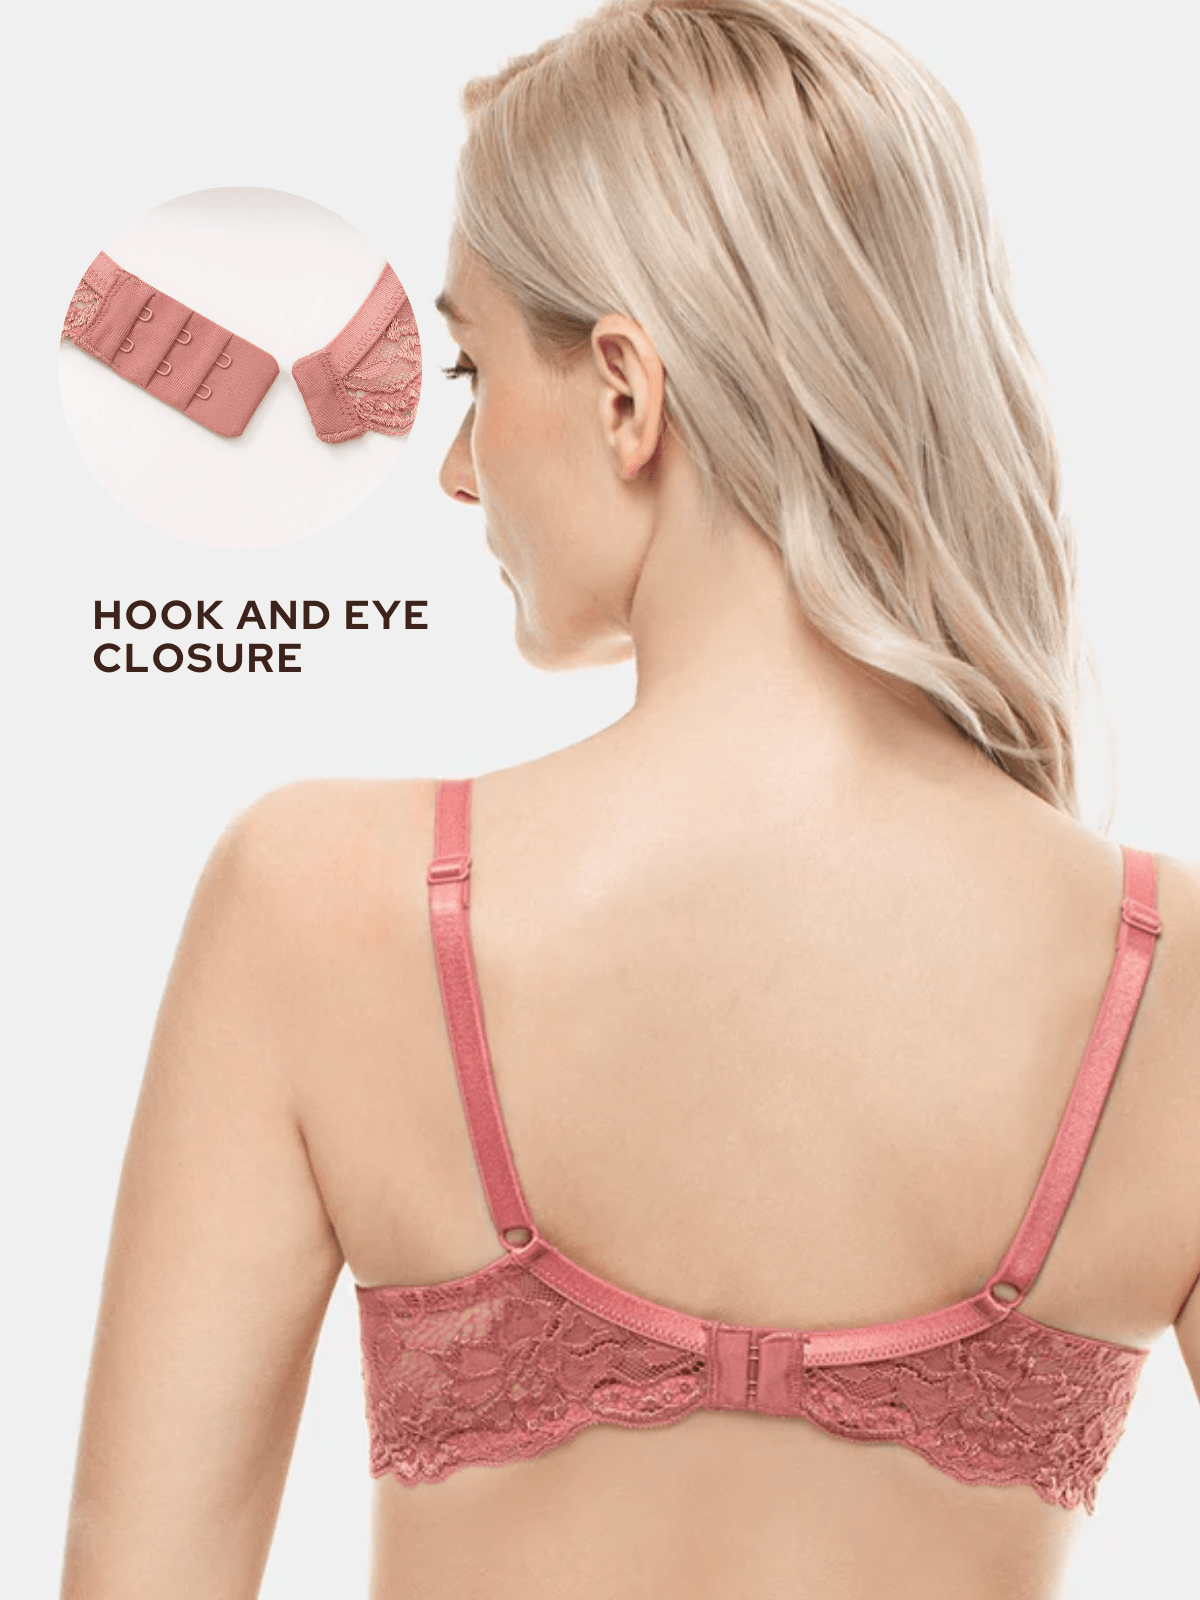 Shop Padded Bralette with Lace Detail and Hook and Eye Closure